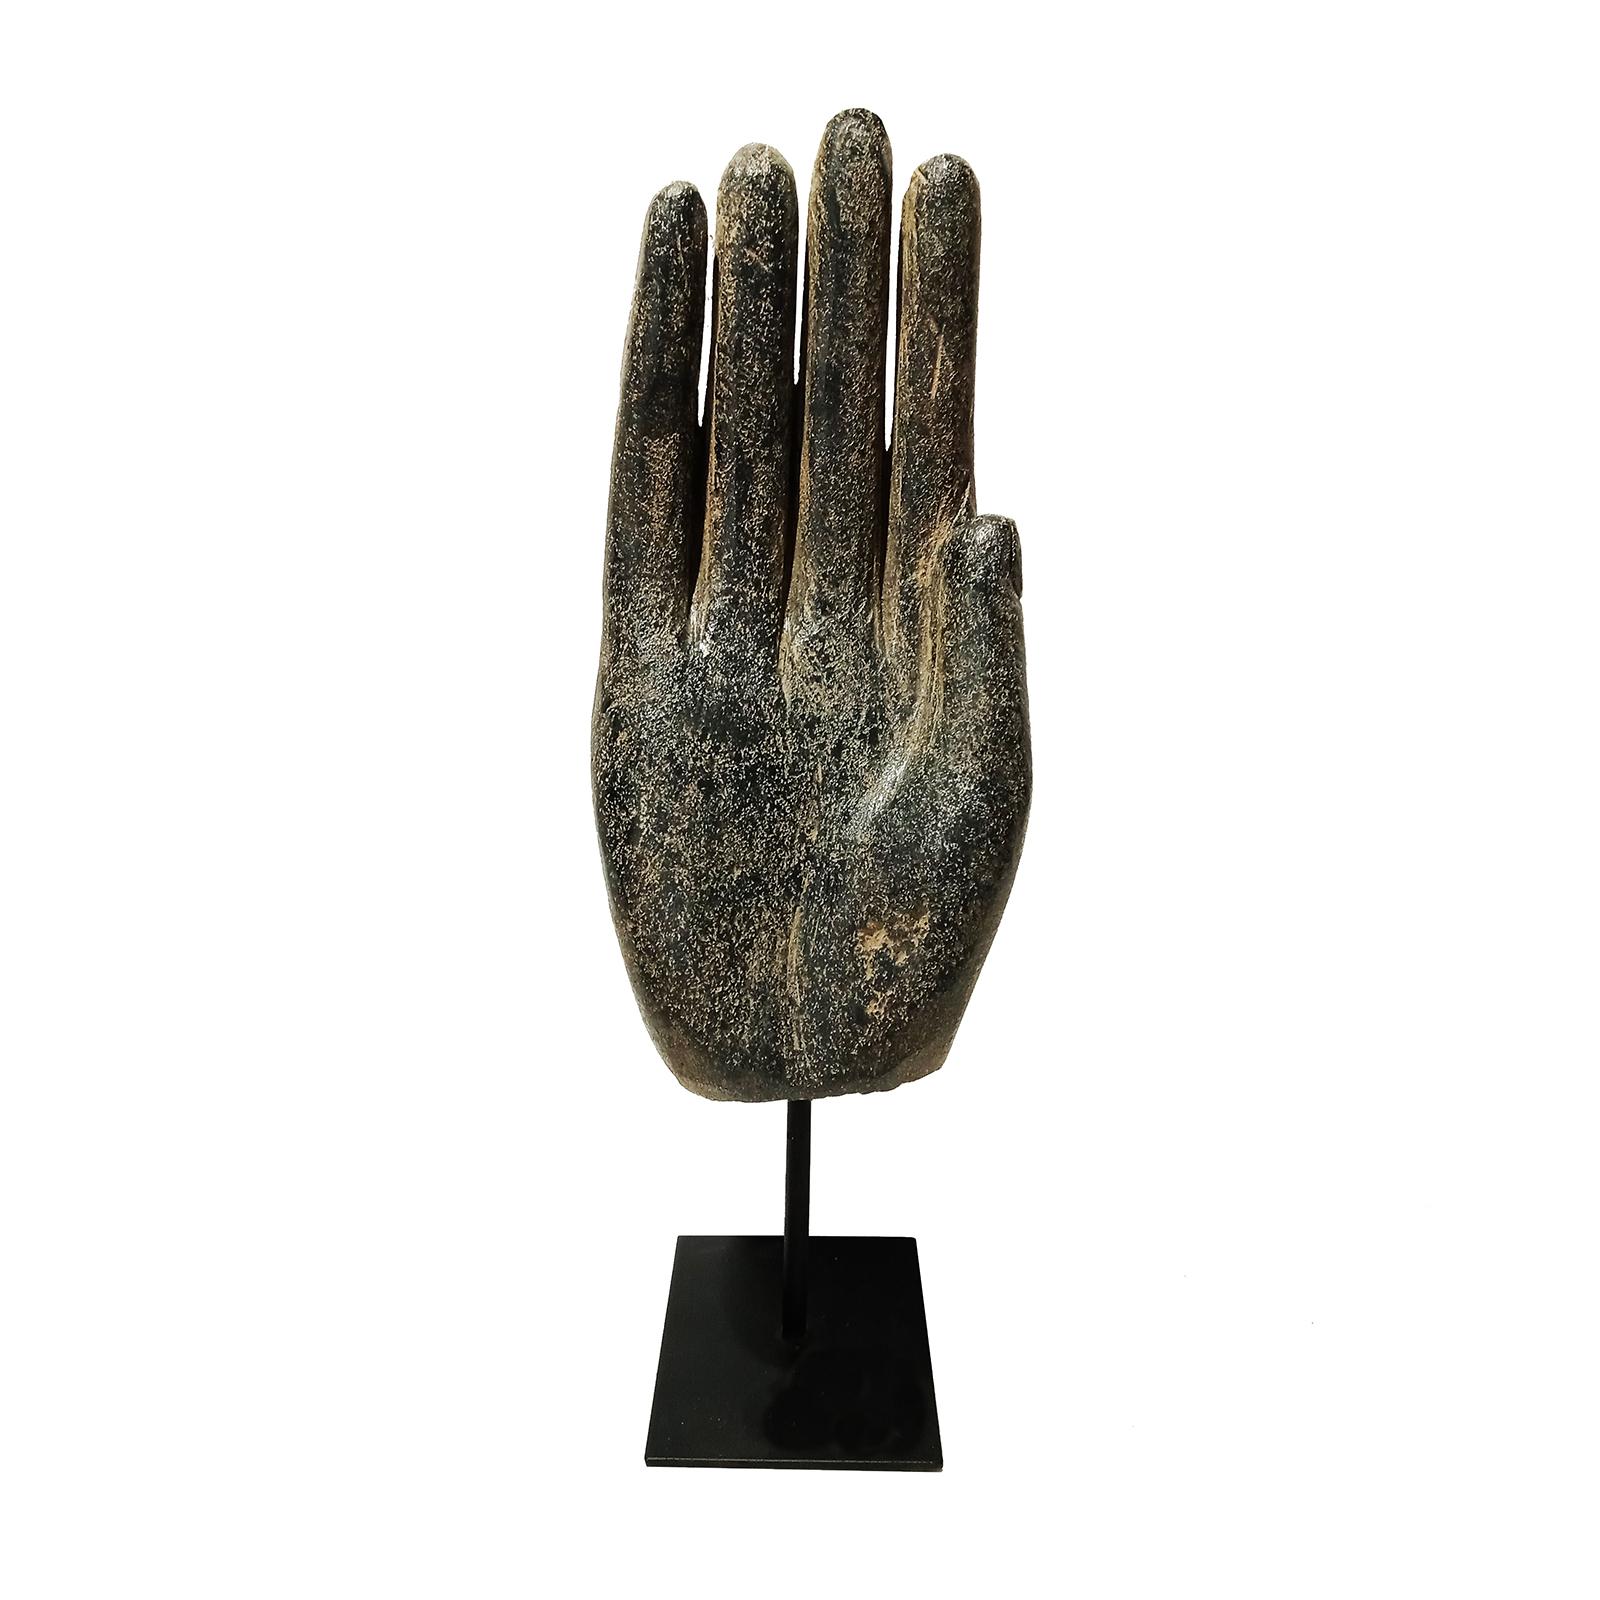 Other Three Volcanic Rock Hand Sculptures, Mid 20th Century For Sale